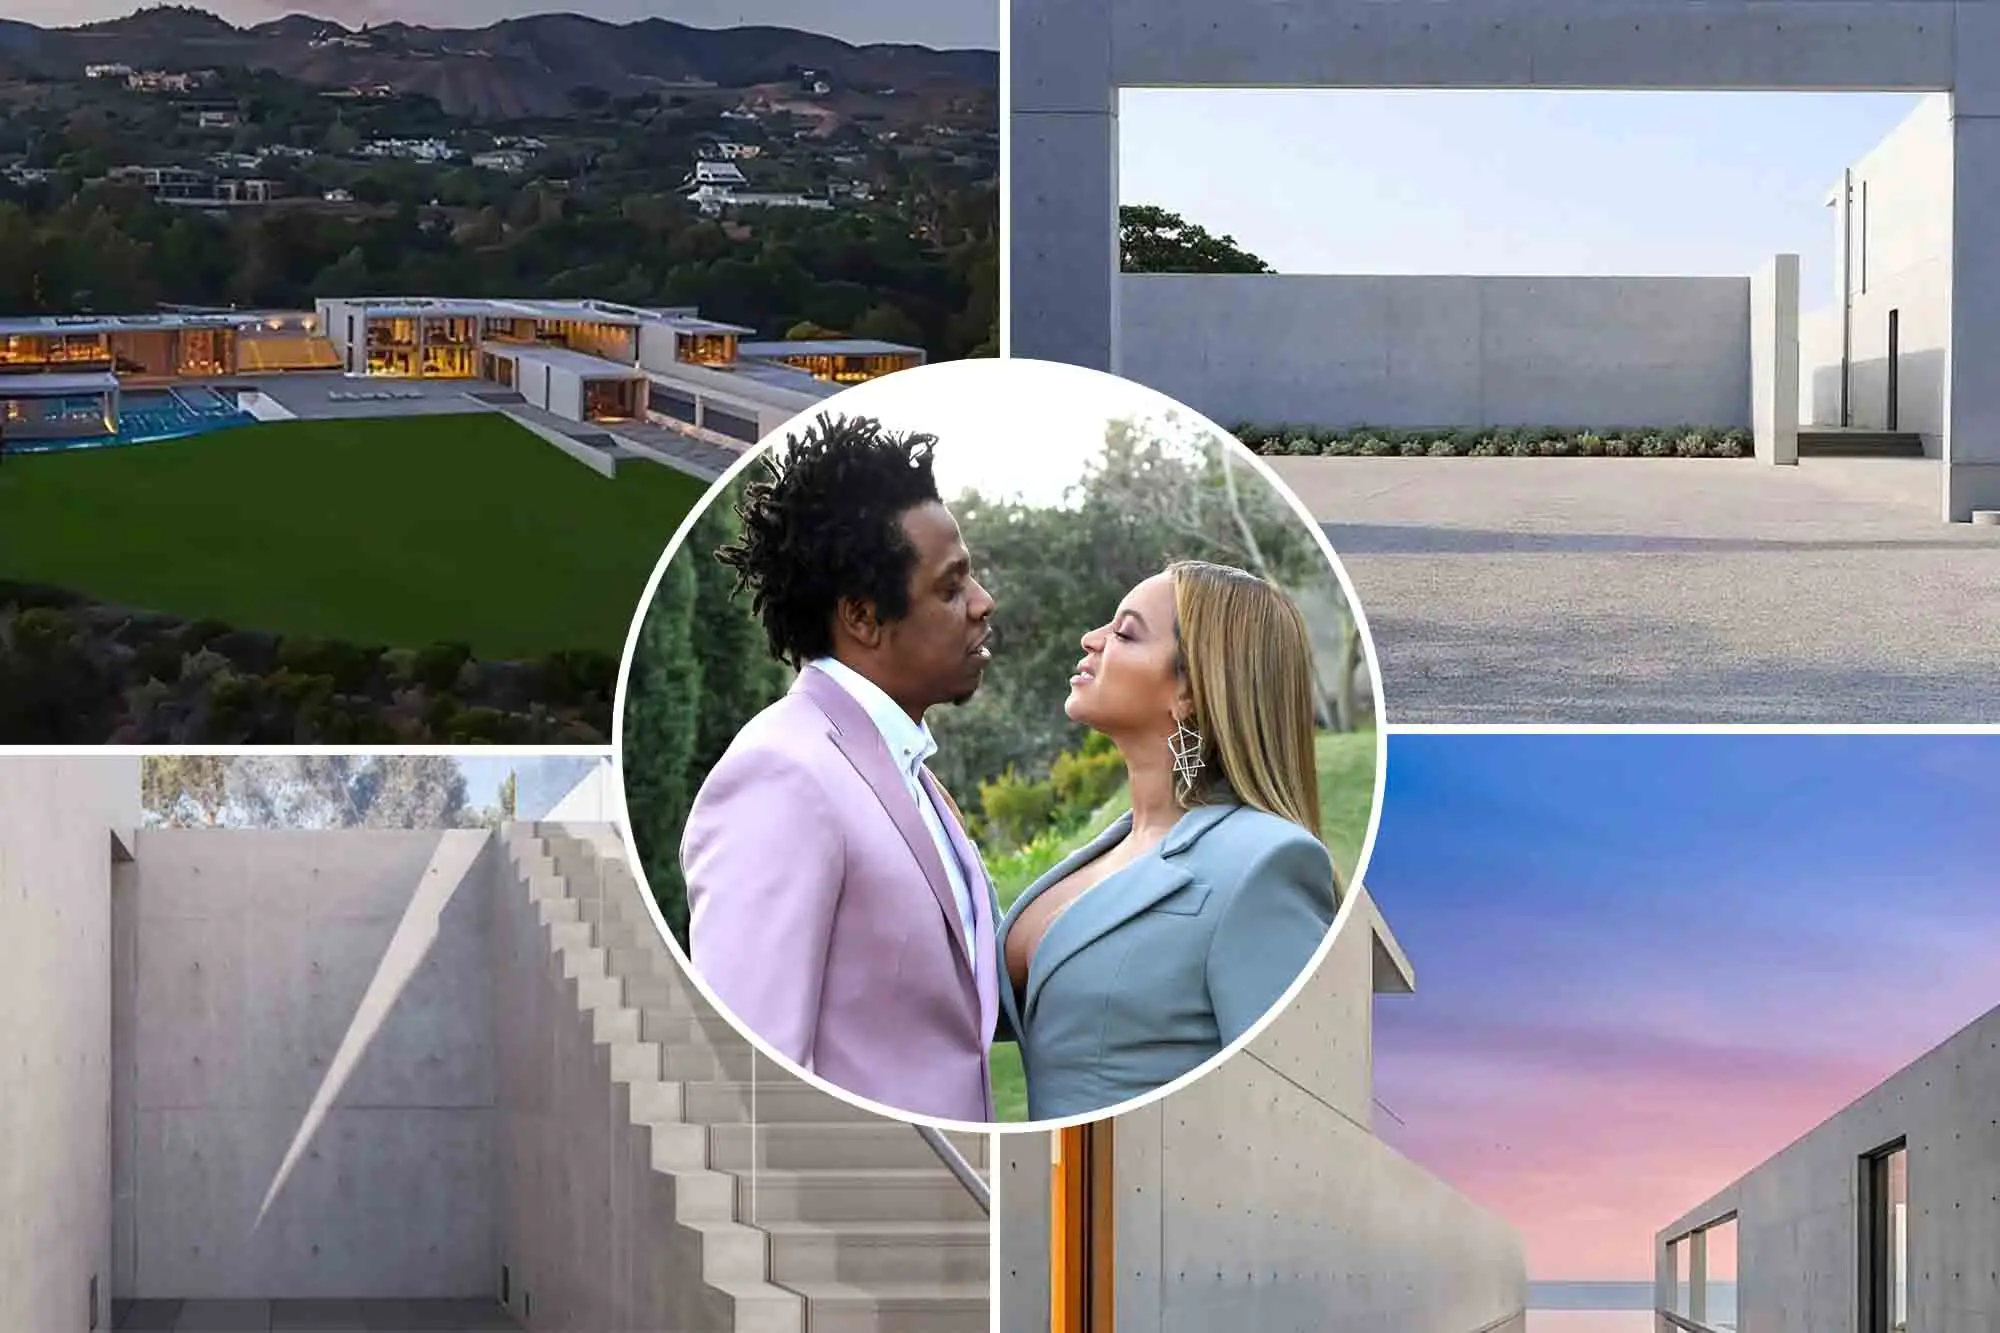 Beyoncé and Jay-Z Buy $200 Million Mansion in Malibu, Marking the Most Expensive Real Estate Deal in California